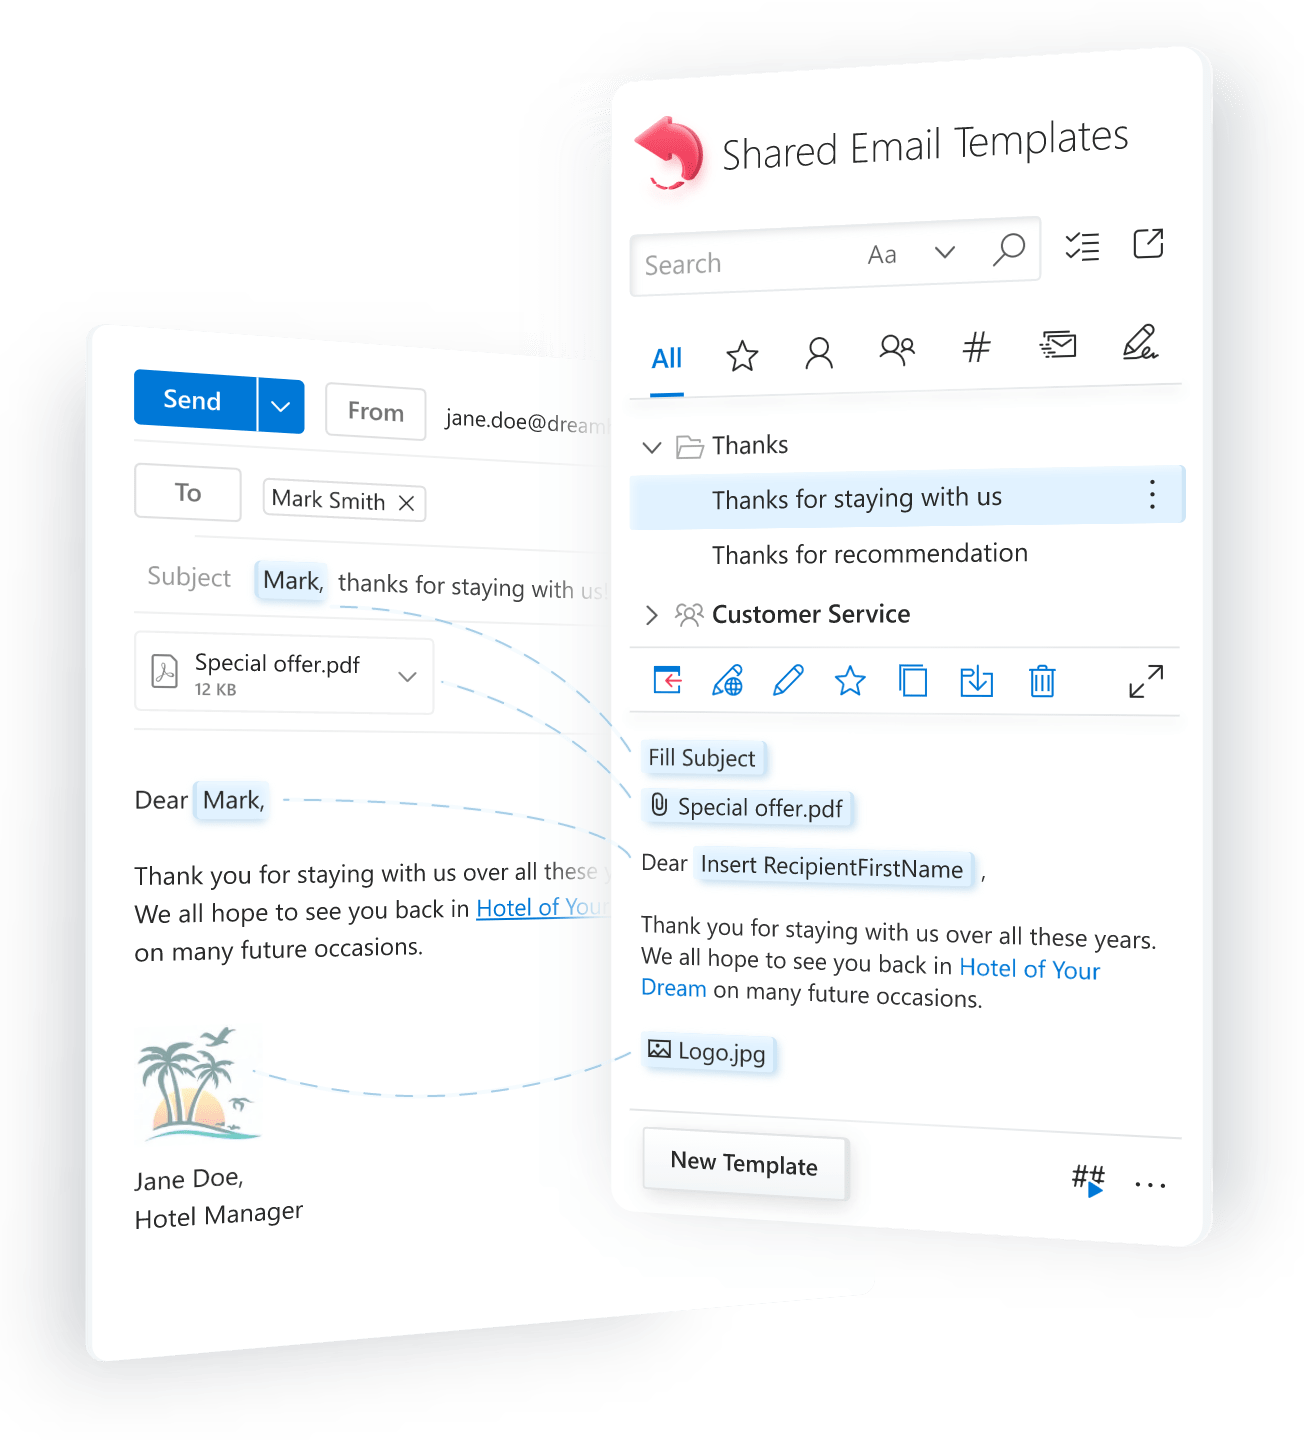 Outlook email templates: shared, personalized, easy customizable